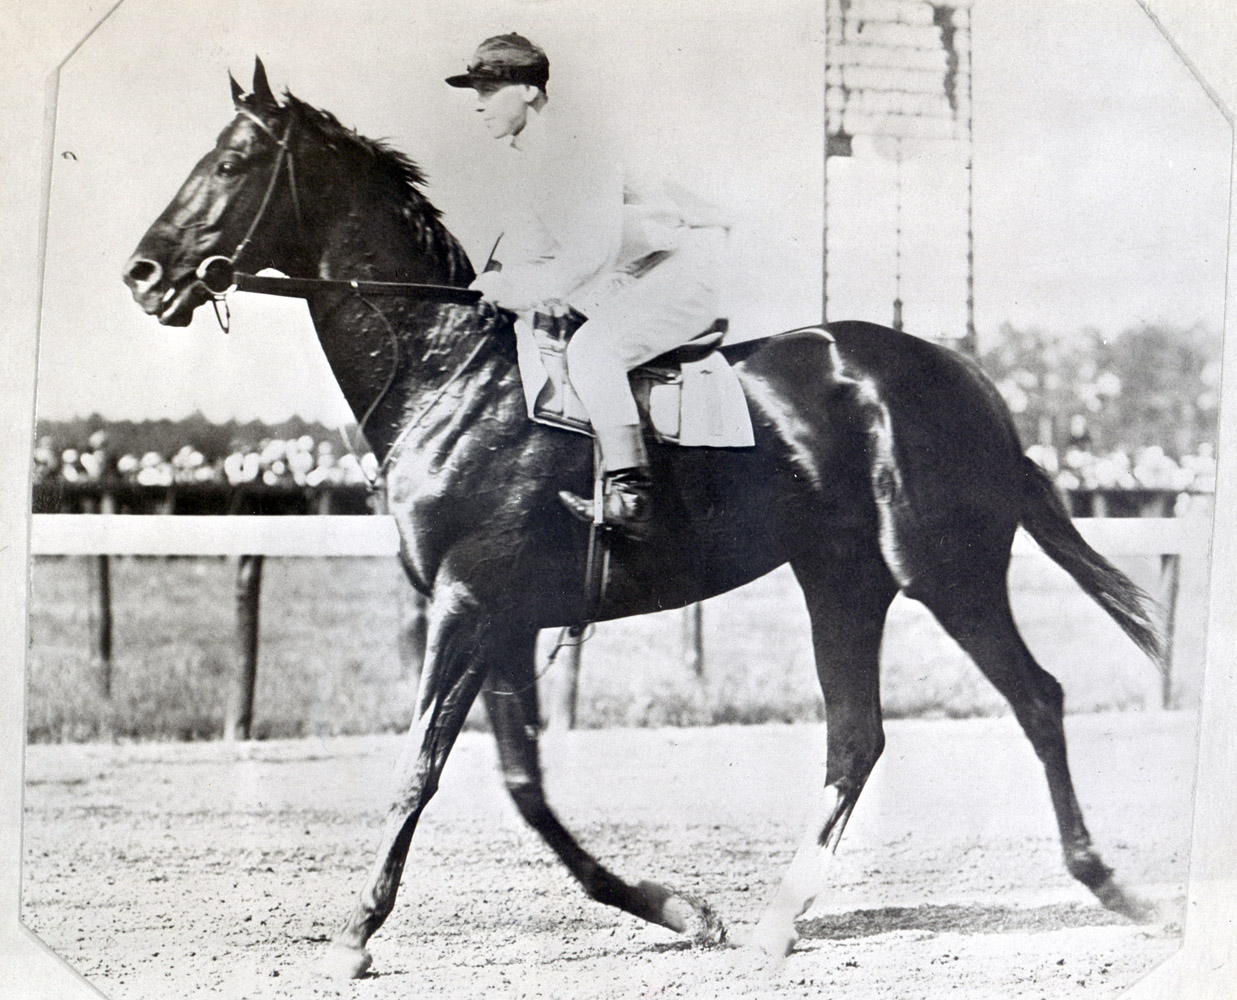 Whisk Broom II with Joe Notter up at Belmont Park, 1913 (Museum Collection)